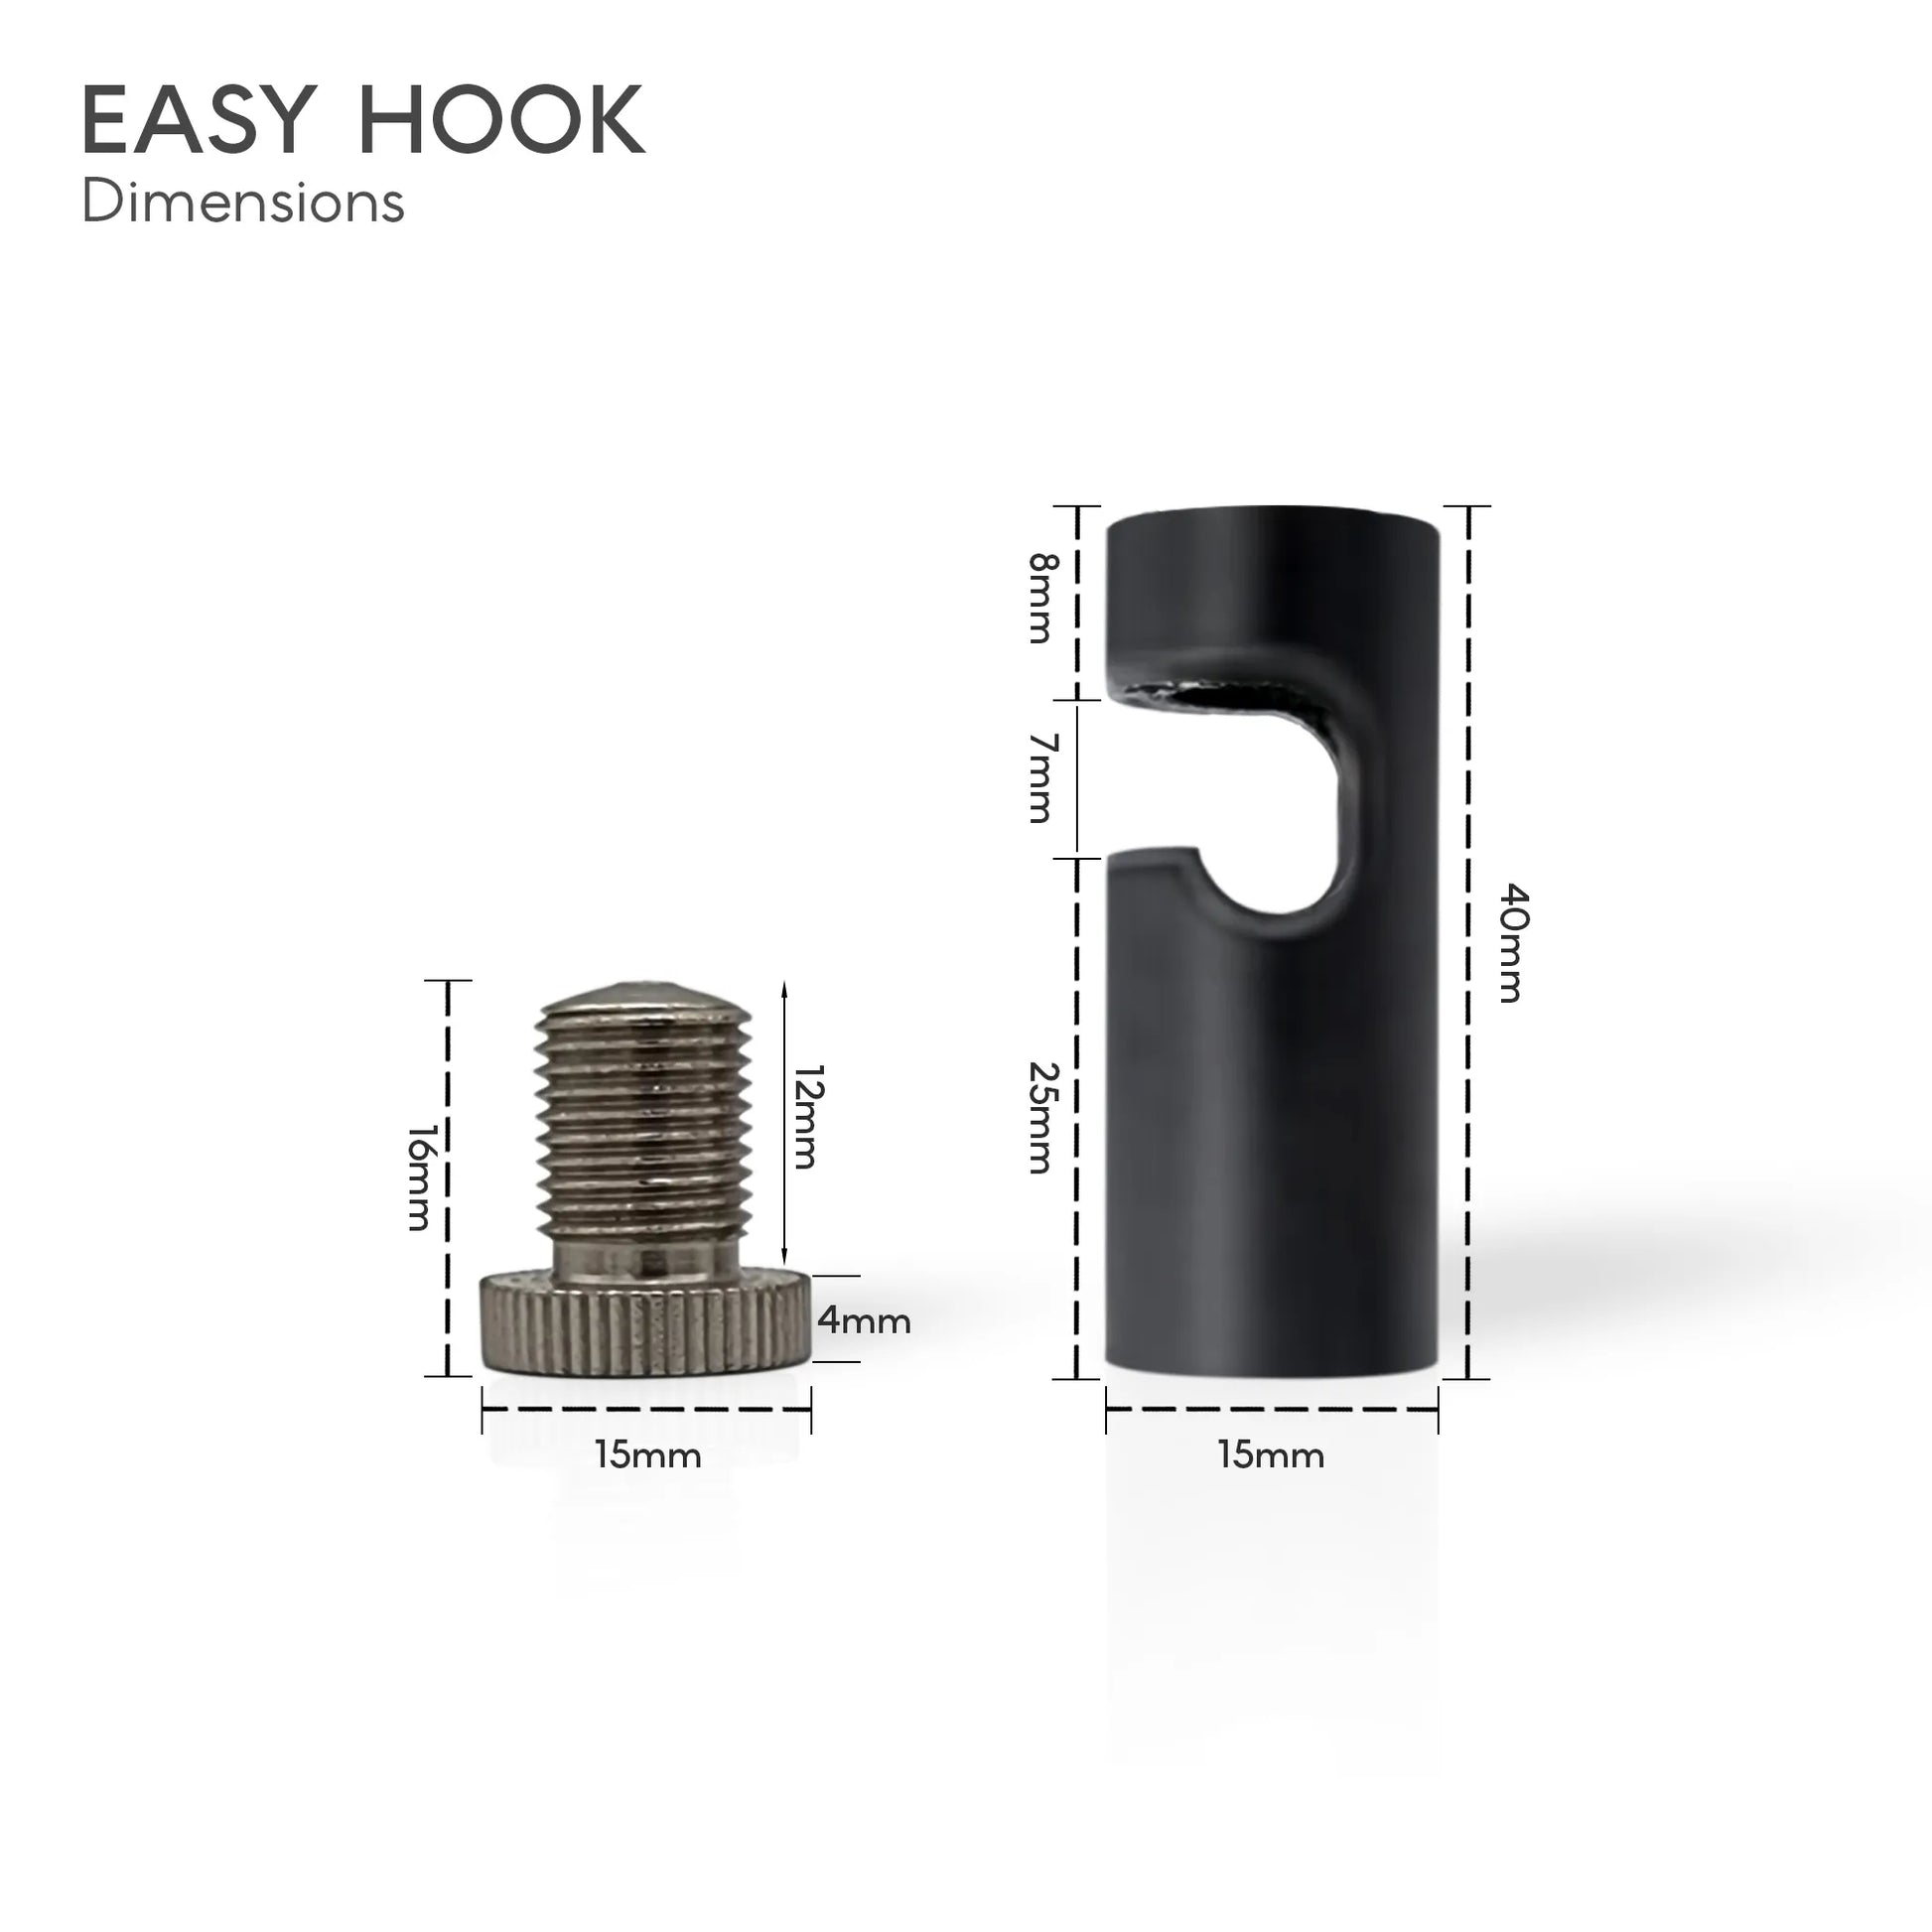 Black cable hook - Dimensions